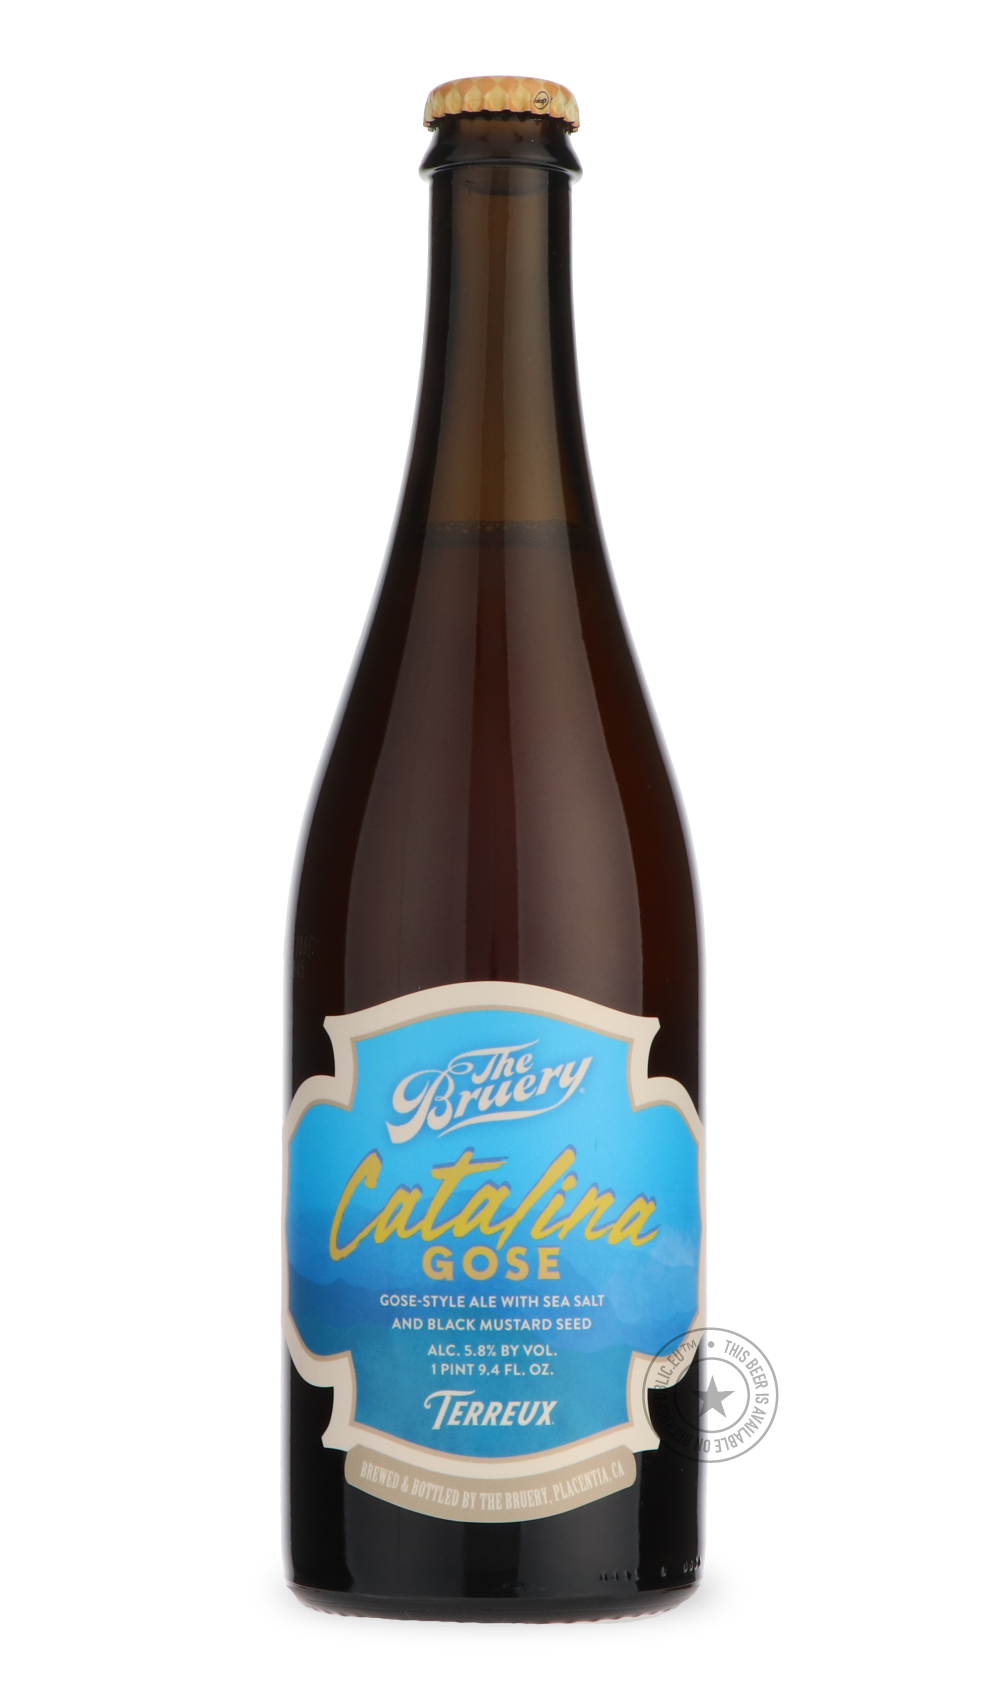 -The Bruery- Terreux Catalina Gose-Sour / Wild & Fruity- Only @ Beer Republic - The best online beer store for American & Canadian craft beer - Buy beer online from the USA and Canada - Bier online kopen - Amerikaans bier kopen - Craft beer store - Craft beer kopen - Amerikanisch bier kaufen - Bier online kaufen - Acheter biere online - IPA - Stout - Porter - New England IPA - Hazy IPA - Imperial Stout - Barrel Aged - Barrel Aged Imperial Stout - Brown - Dark beer - Blond - Blonde - Pilsner - Lager - Wheat 